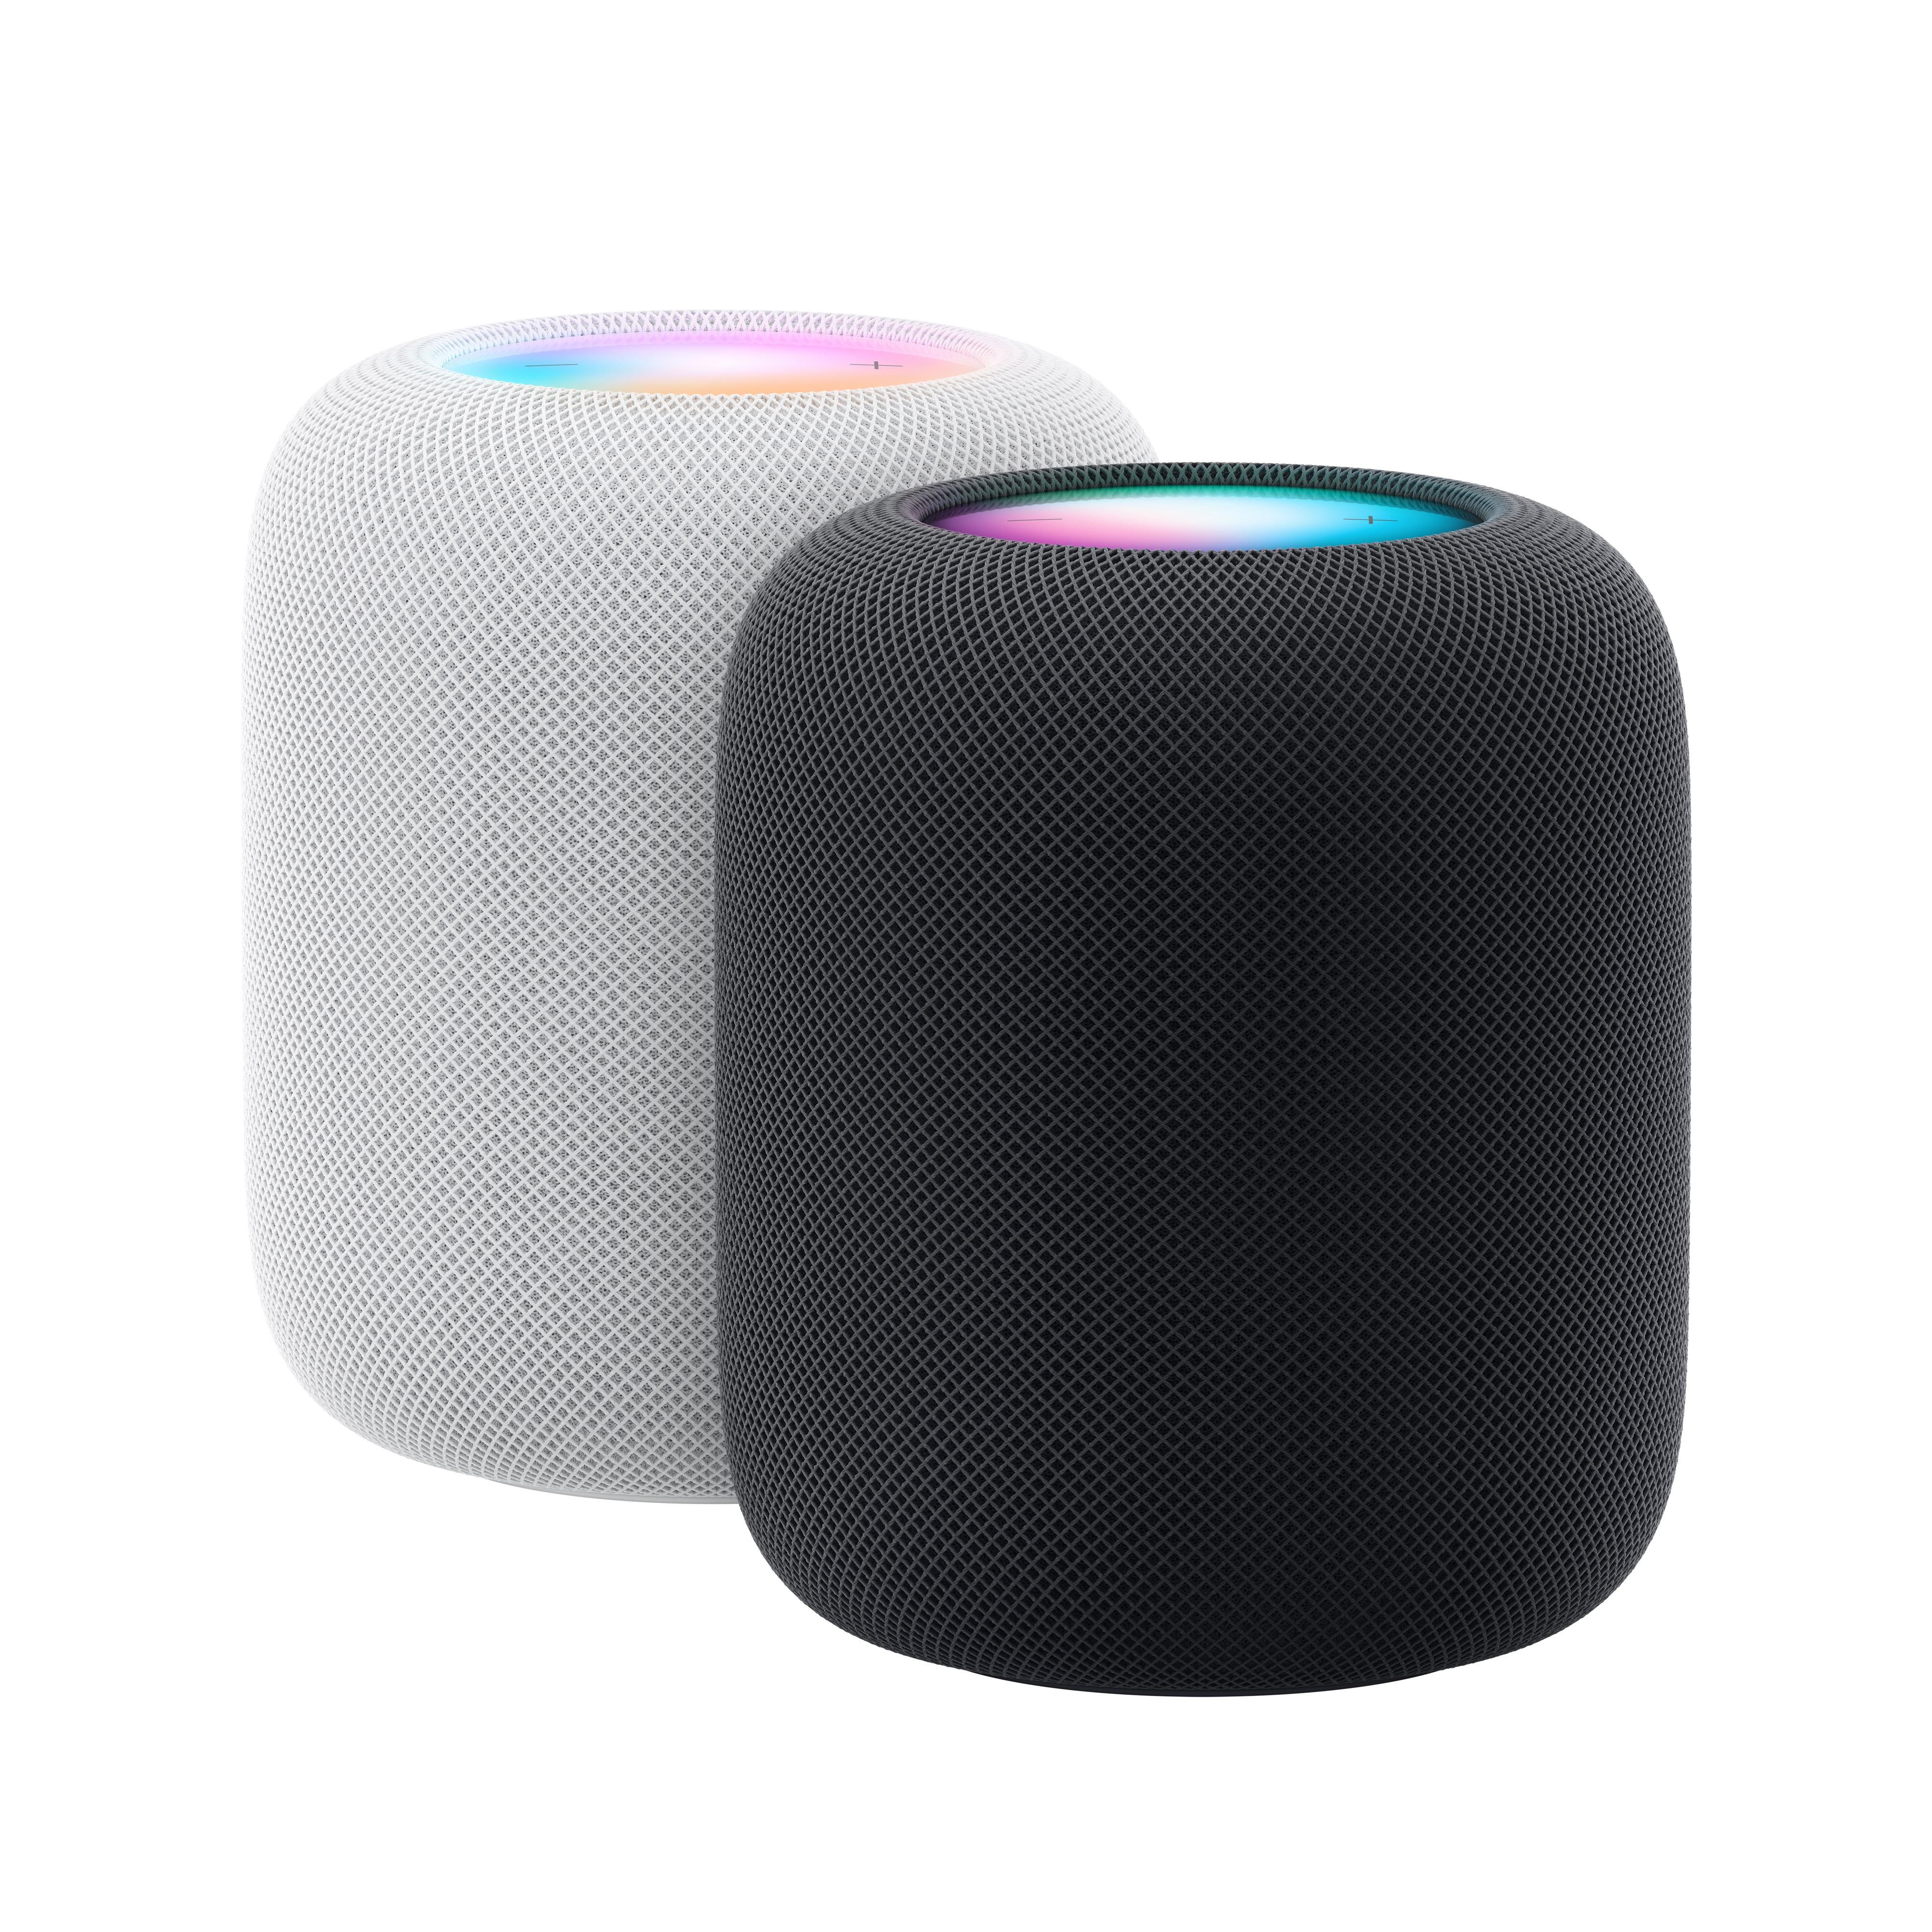 Apple Homepod Voice Assistant